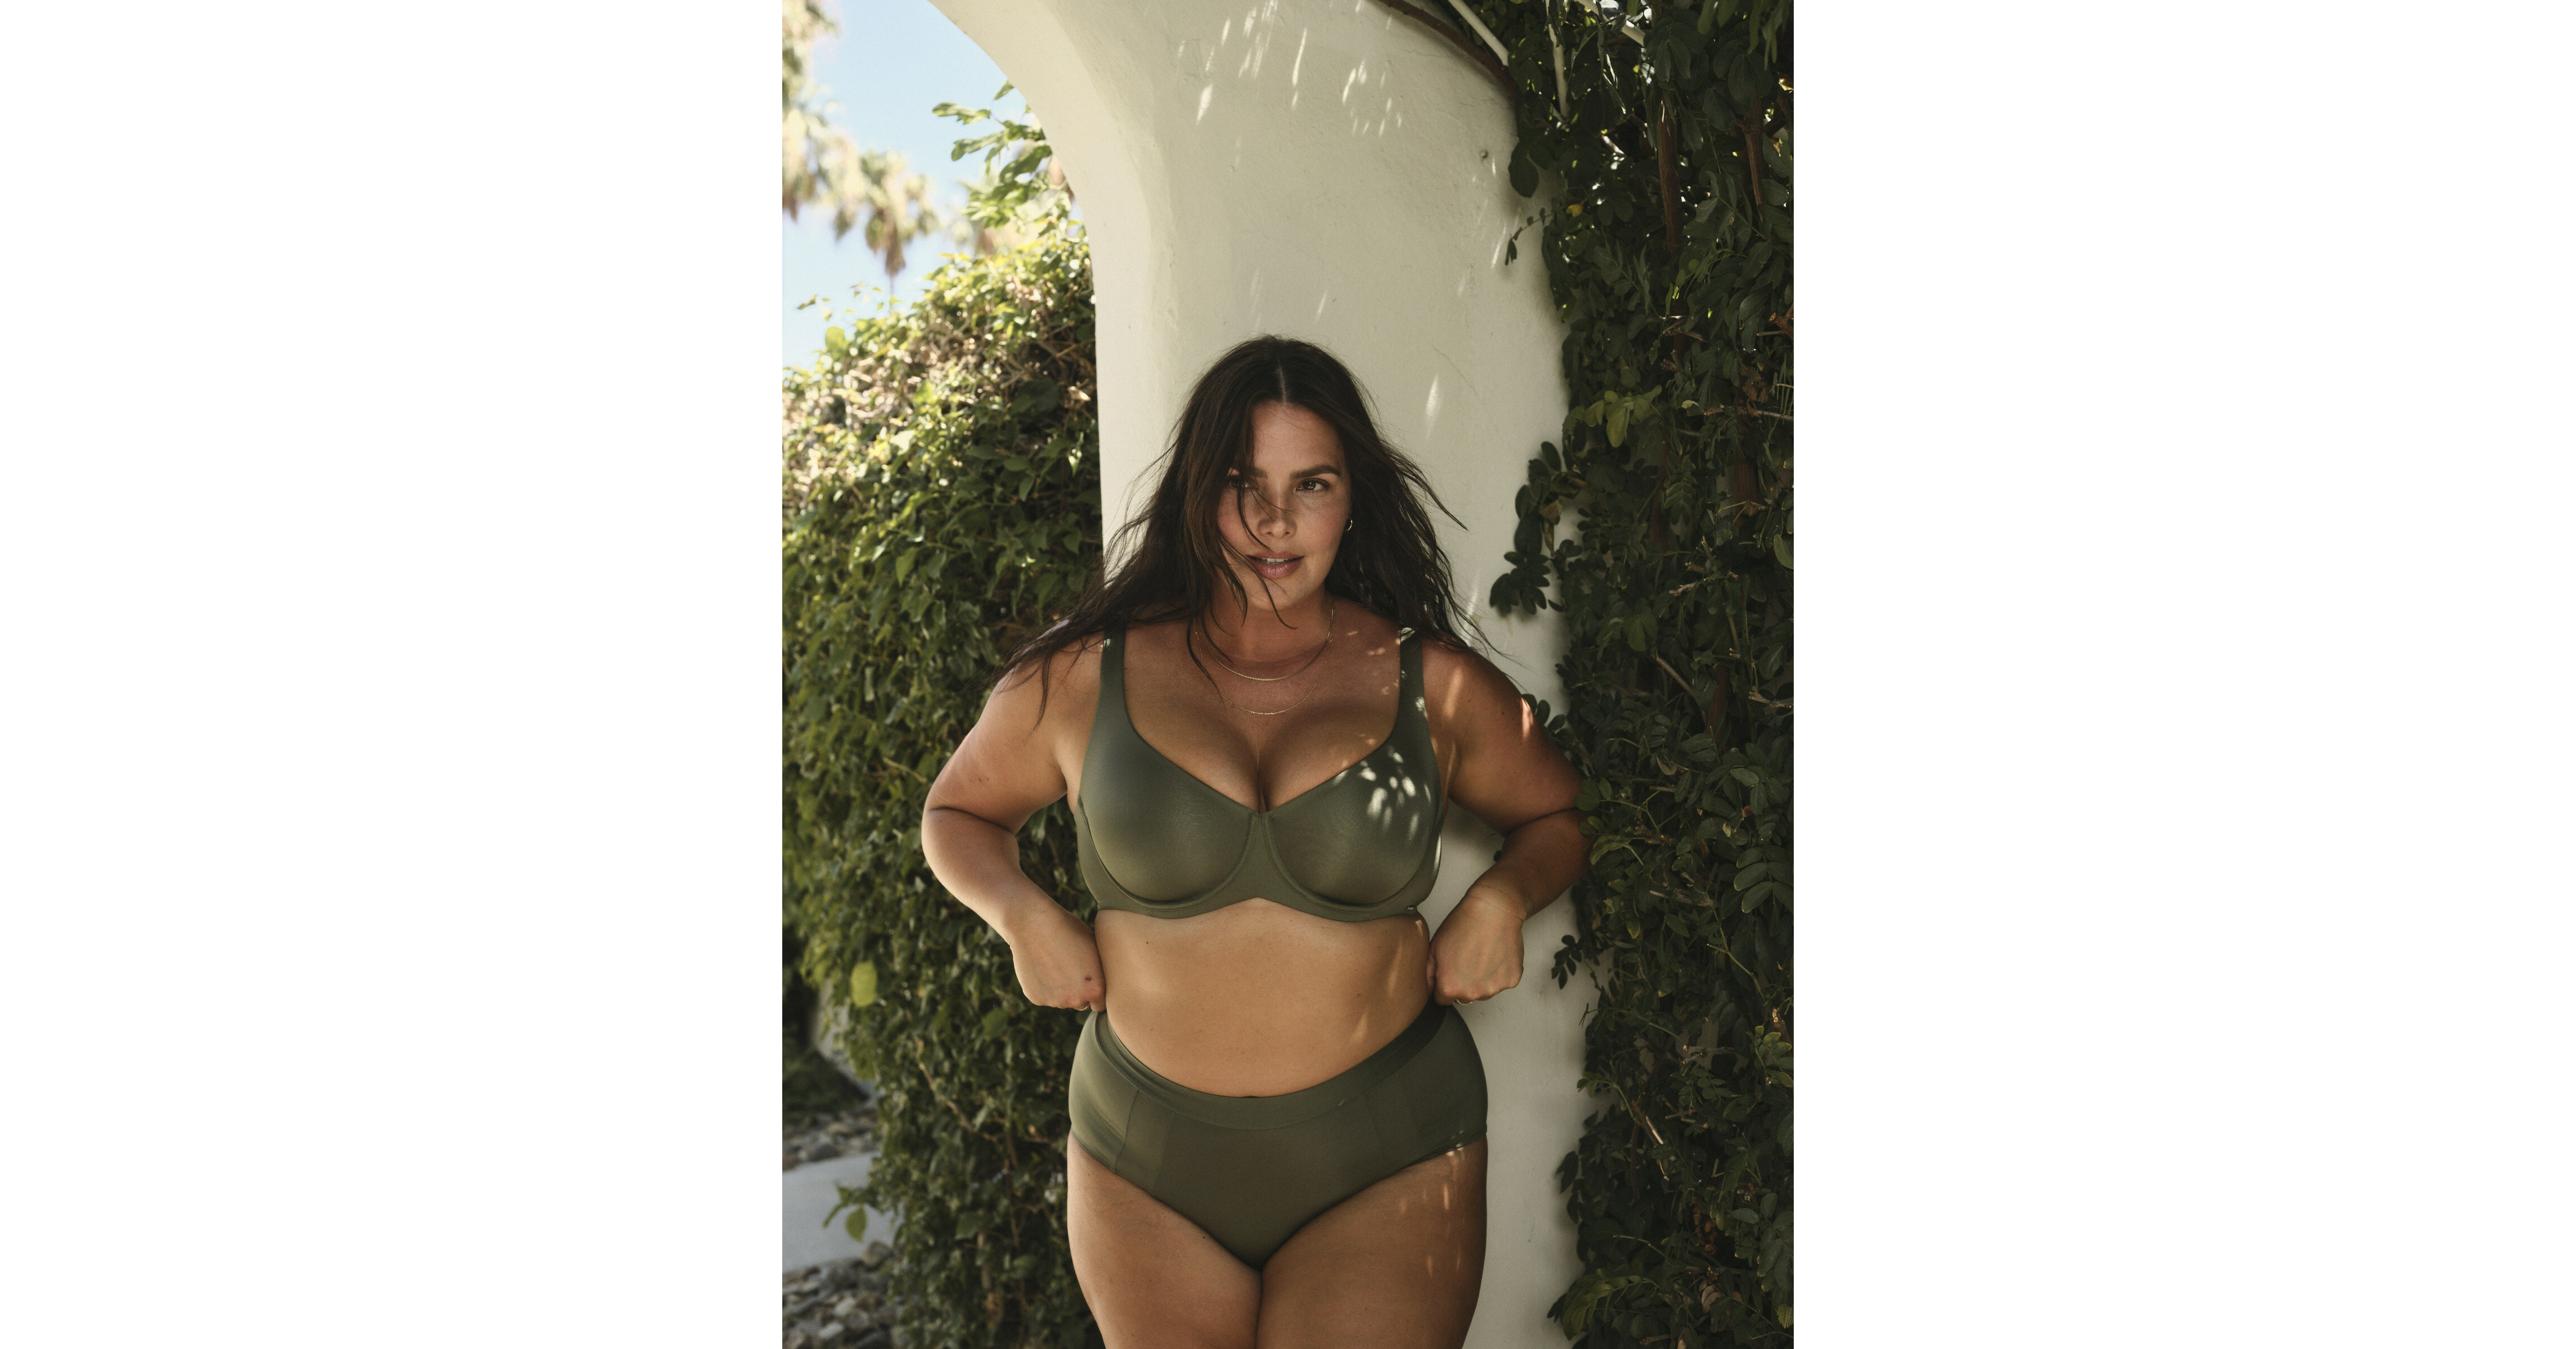 BEAT THE AUGUST HEAT WITH THESE NEW CANDICE HUFFINE-APPROVED BRAS